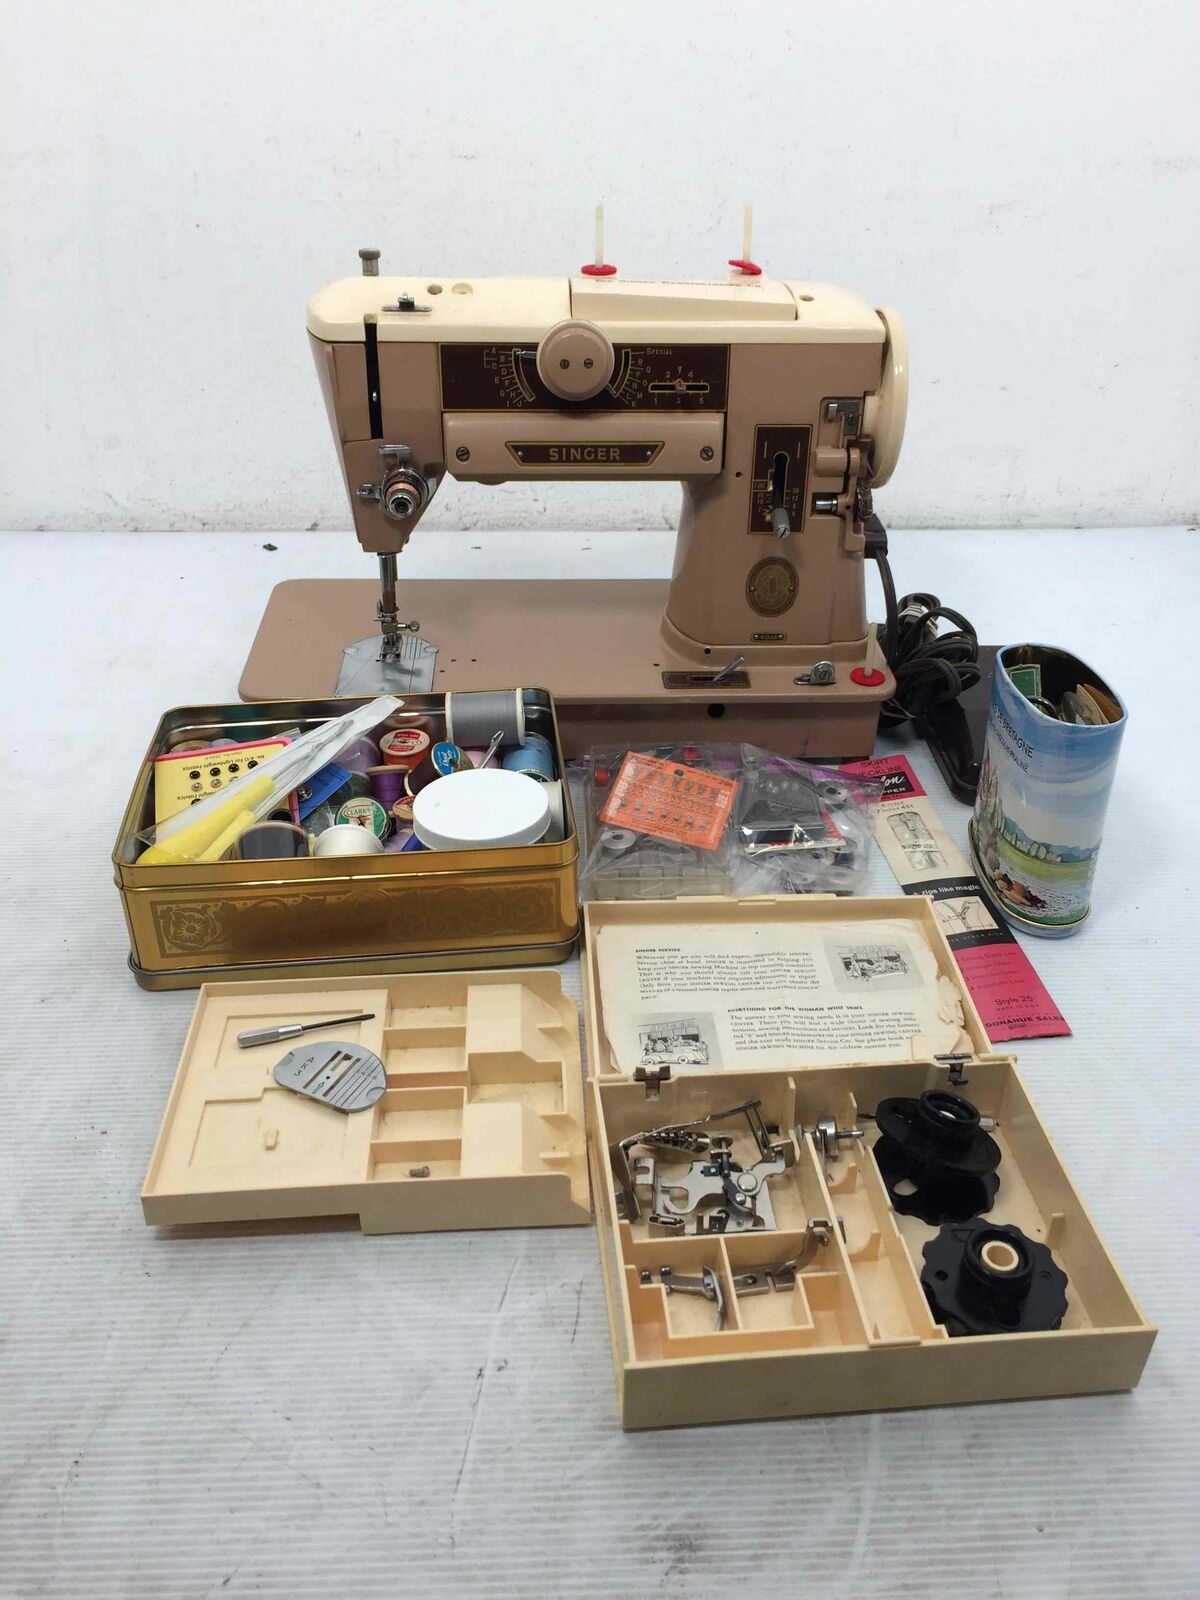 Vintage Singer Sewing Machine Slant O Matic 401A Many Accessories Tested/Working